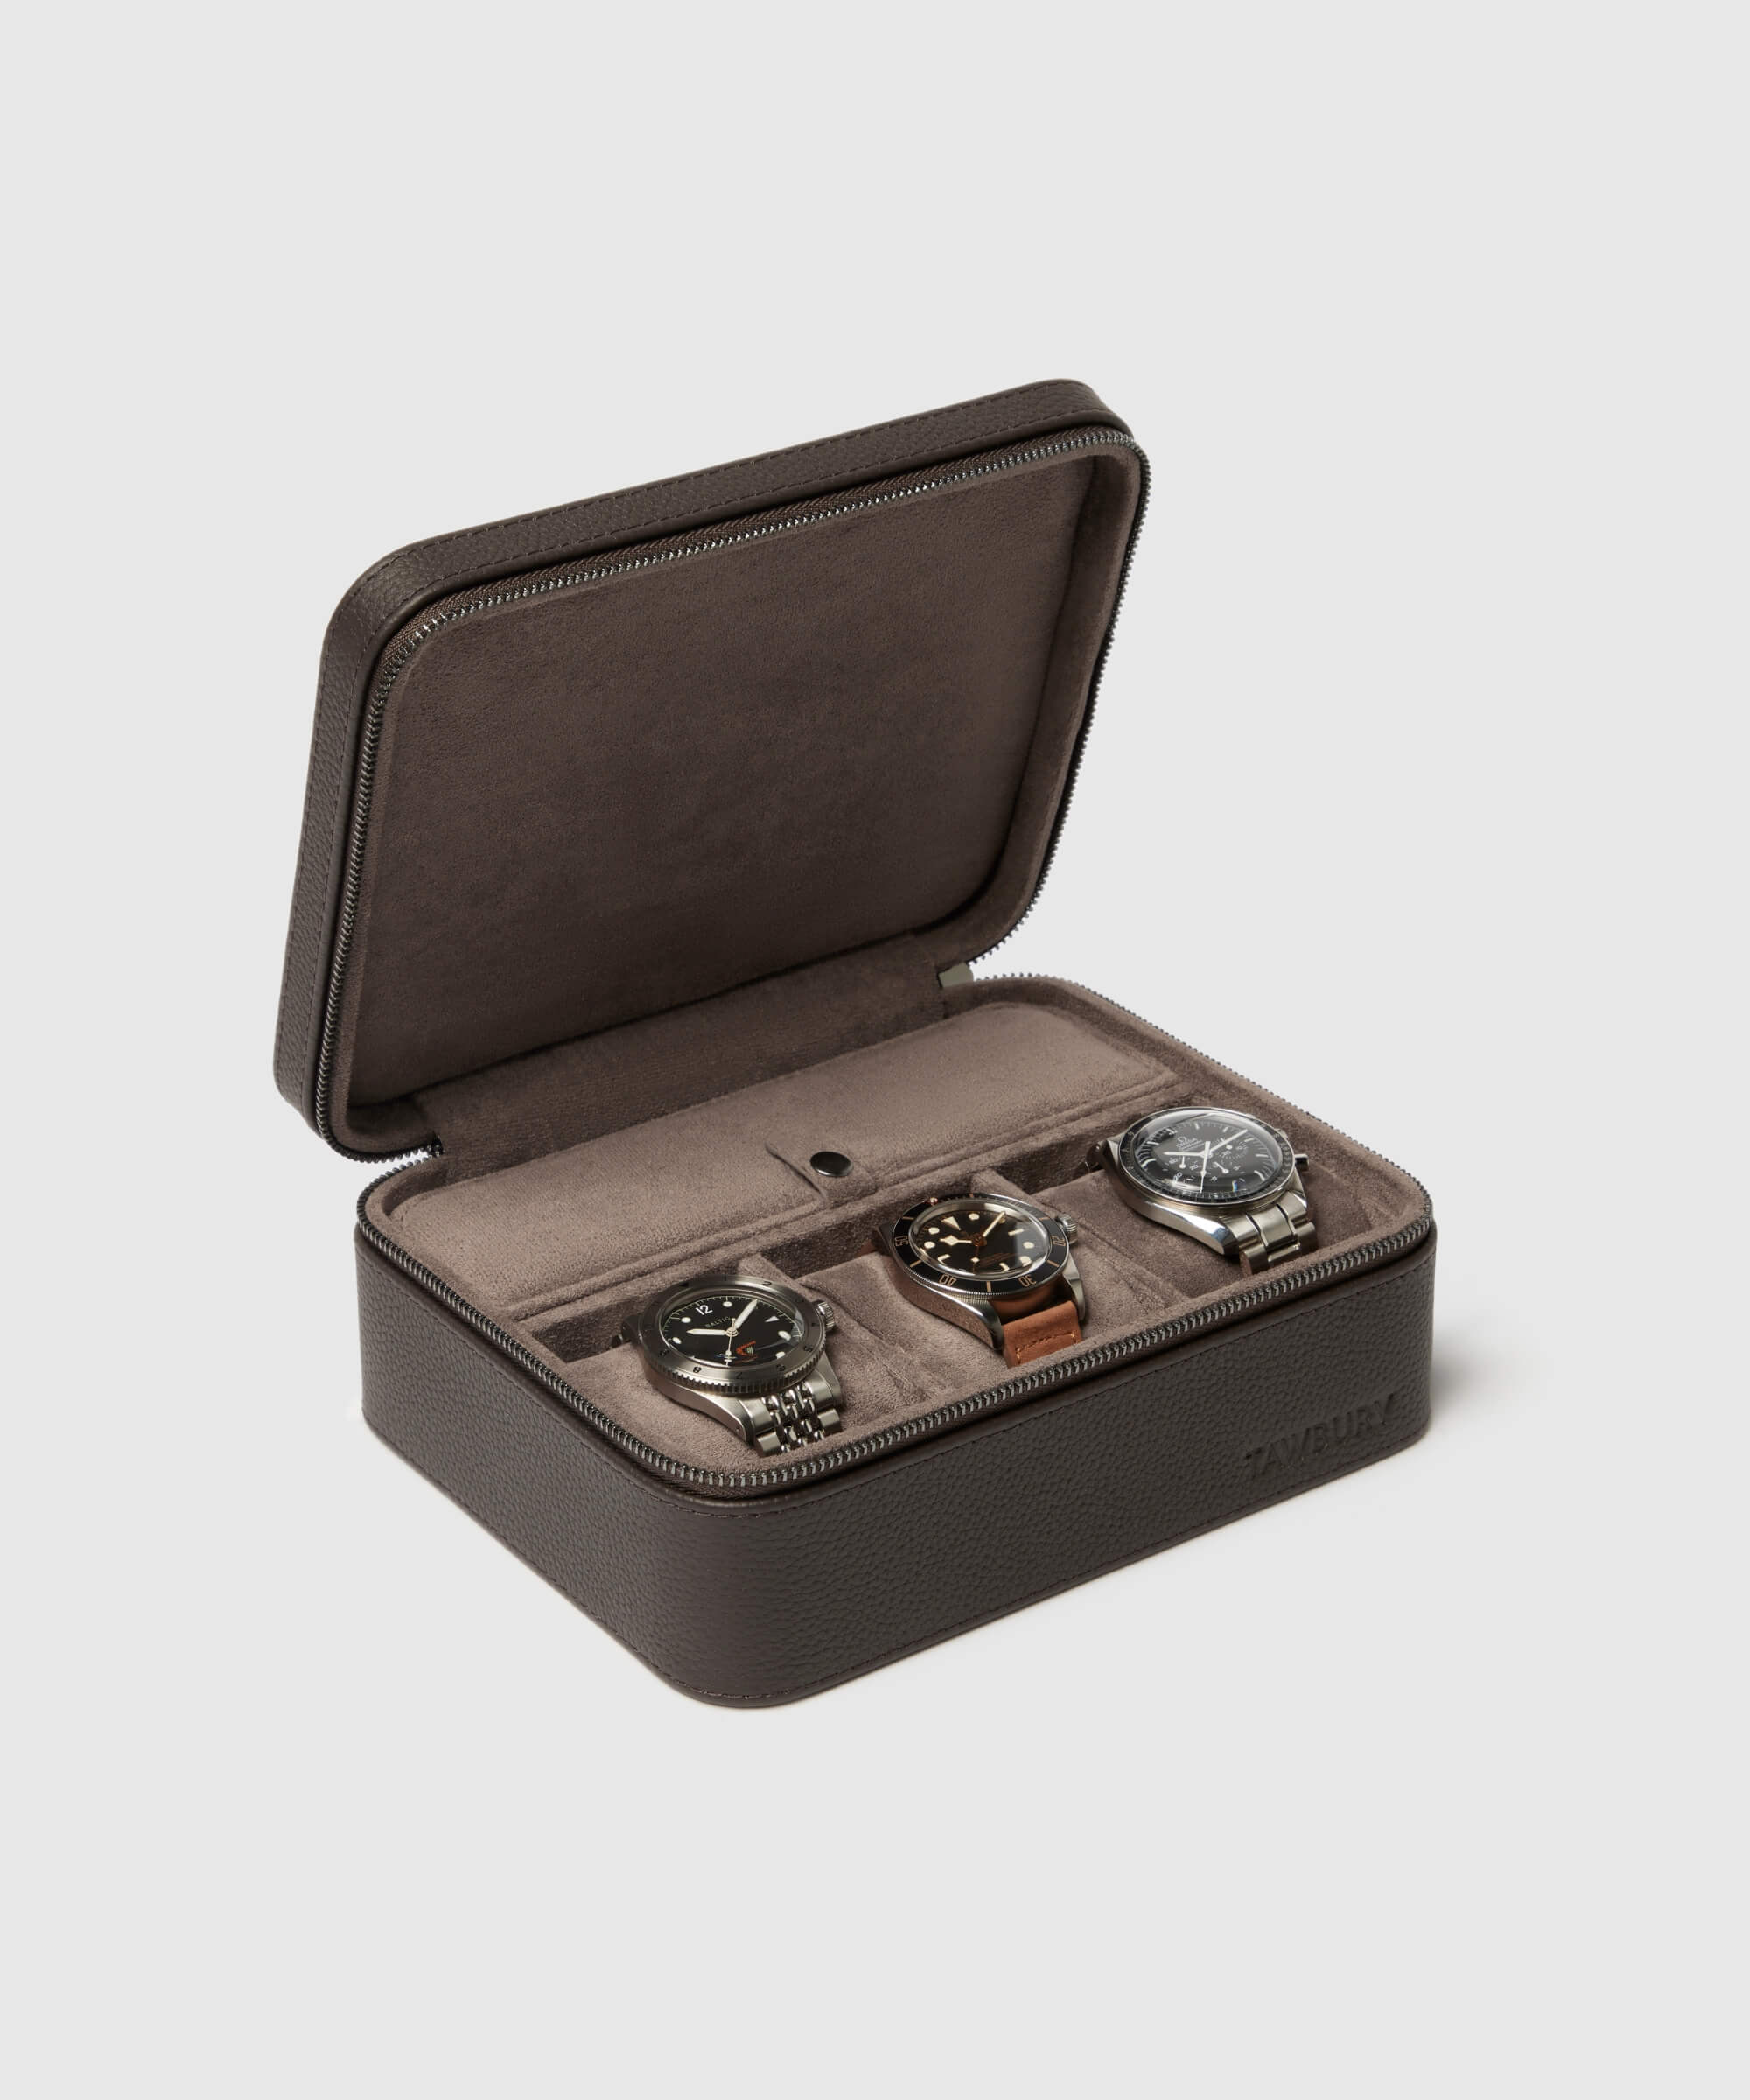 A Fraser 3 Watch Travel Case with Storage - Brown by TAWBURY with three watches inside.